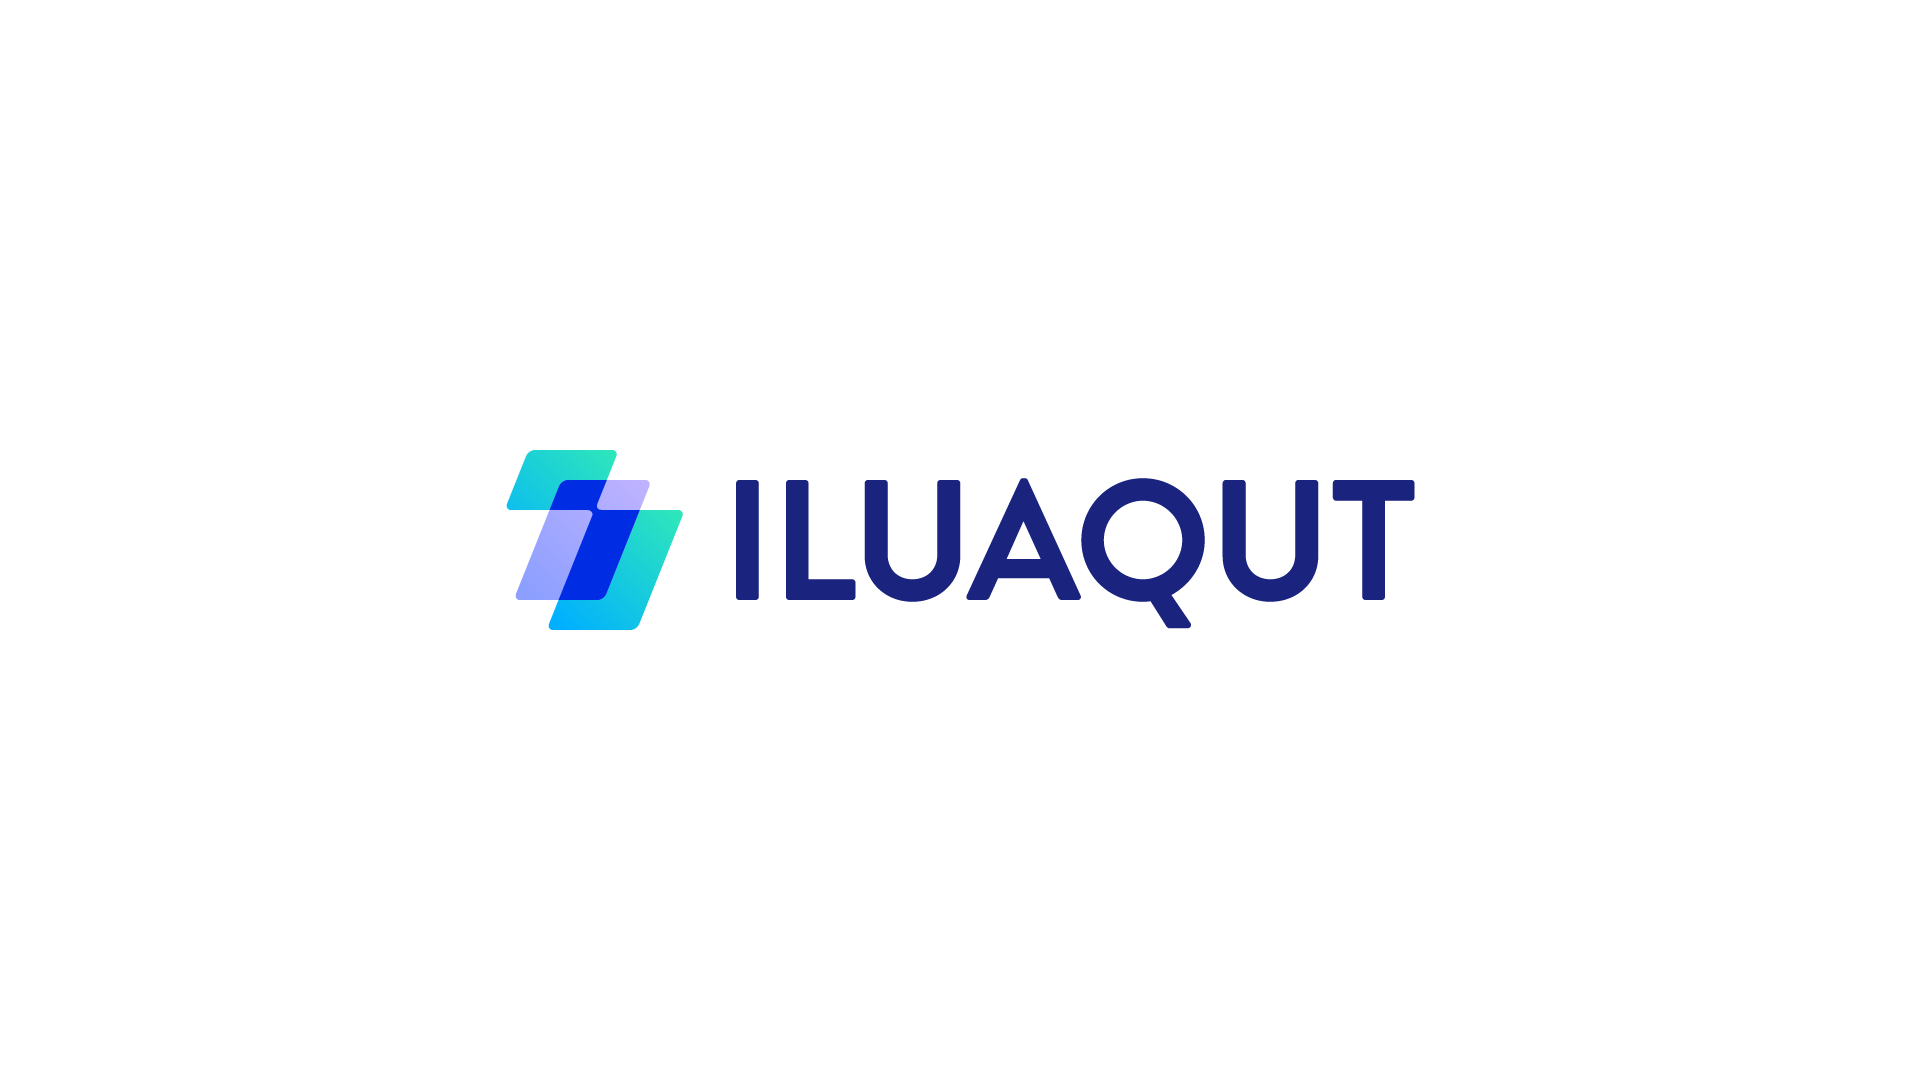 ILUAQUT - IT Consulting and Developing company logo, abstract letter 'I' design, representing innovation and technical expertise